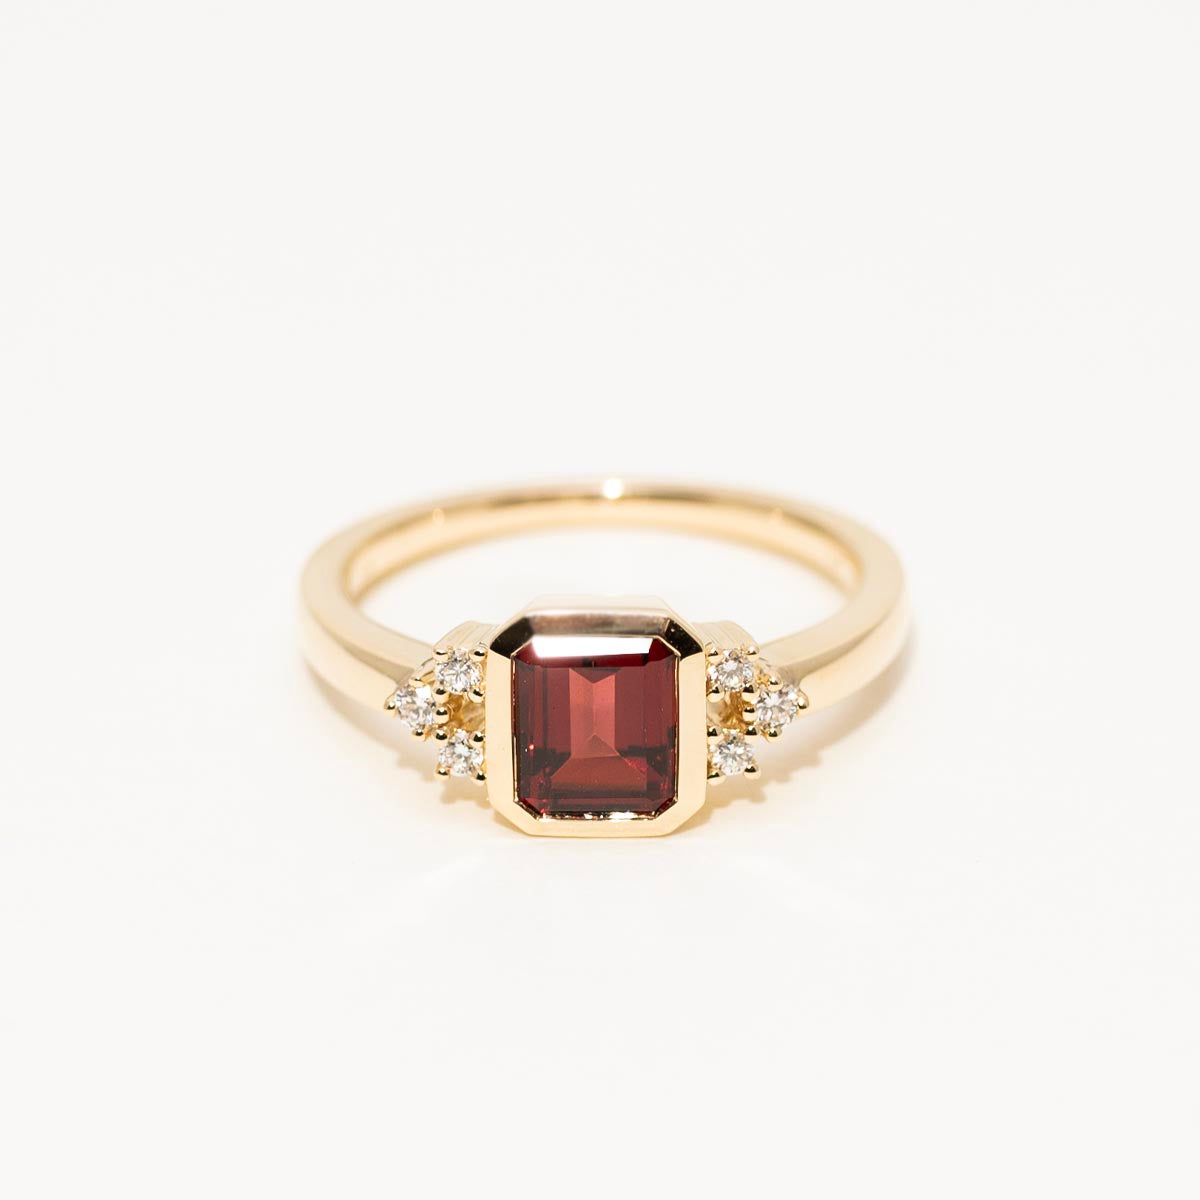 Emerald Cut Garnet Ring in 14kt Yellow Gold with Diamonds (1/10ct tw)